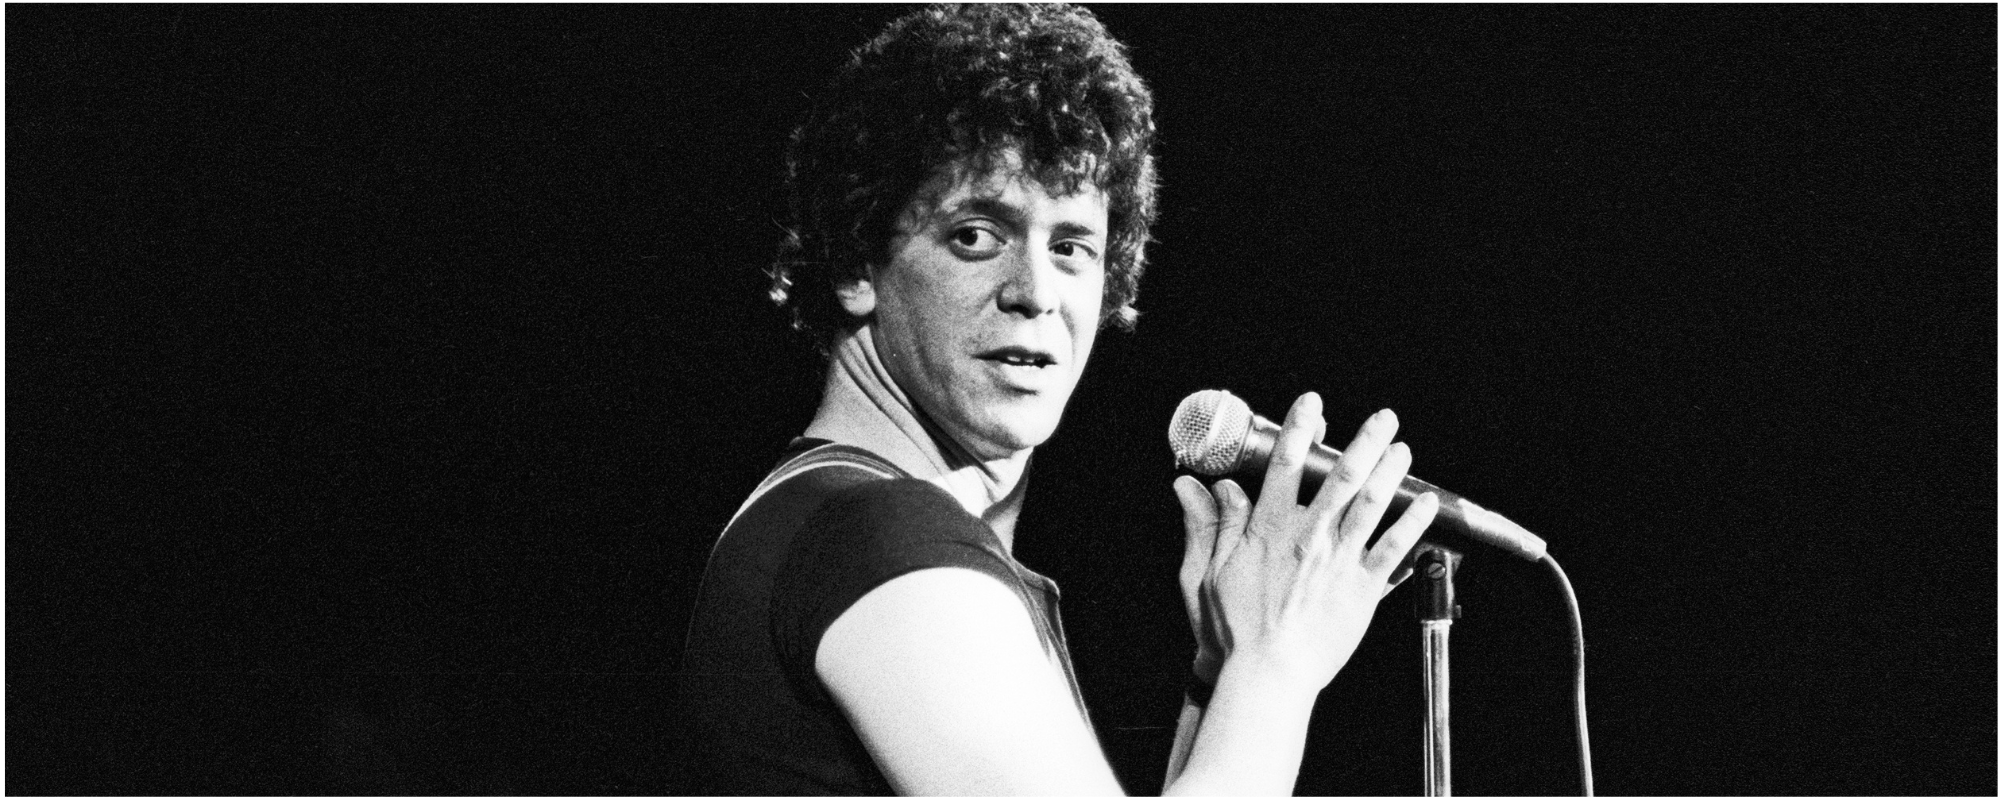 The 20 Best Lou Reed Quotes - American Songwriter